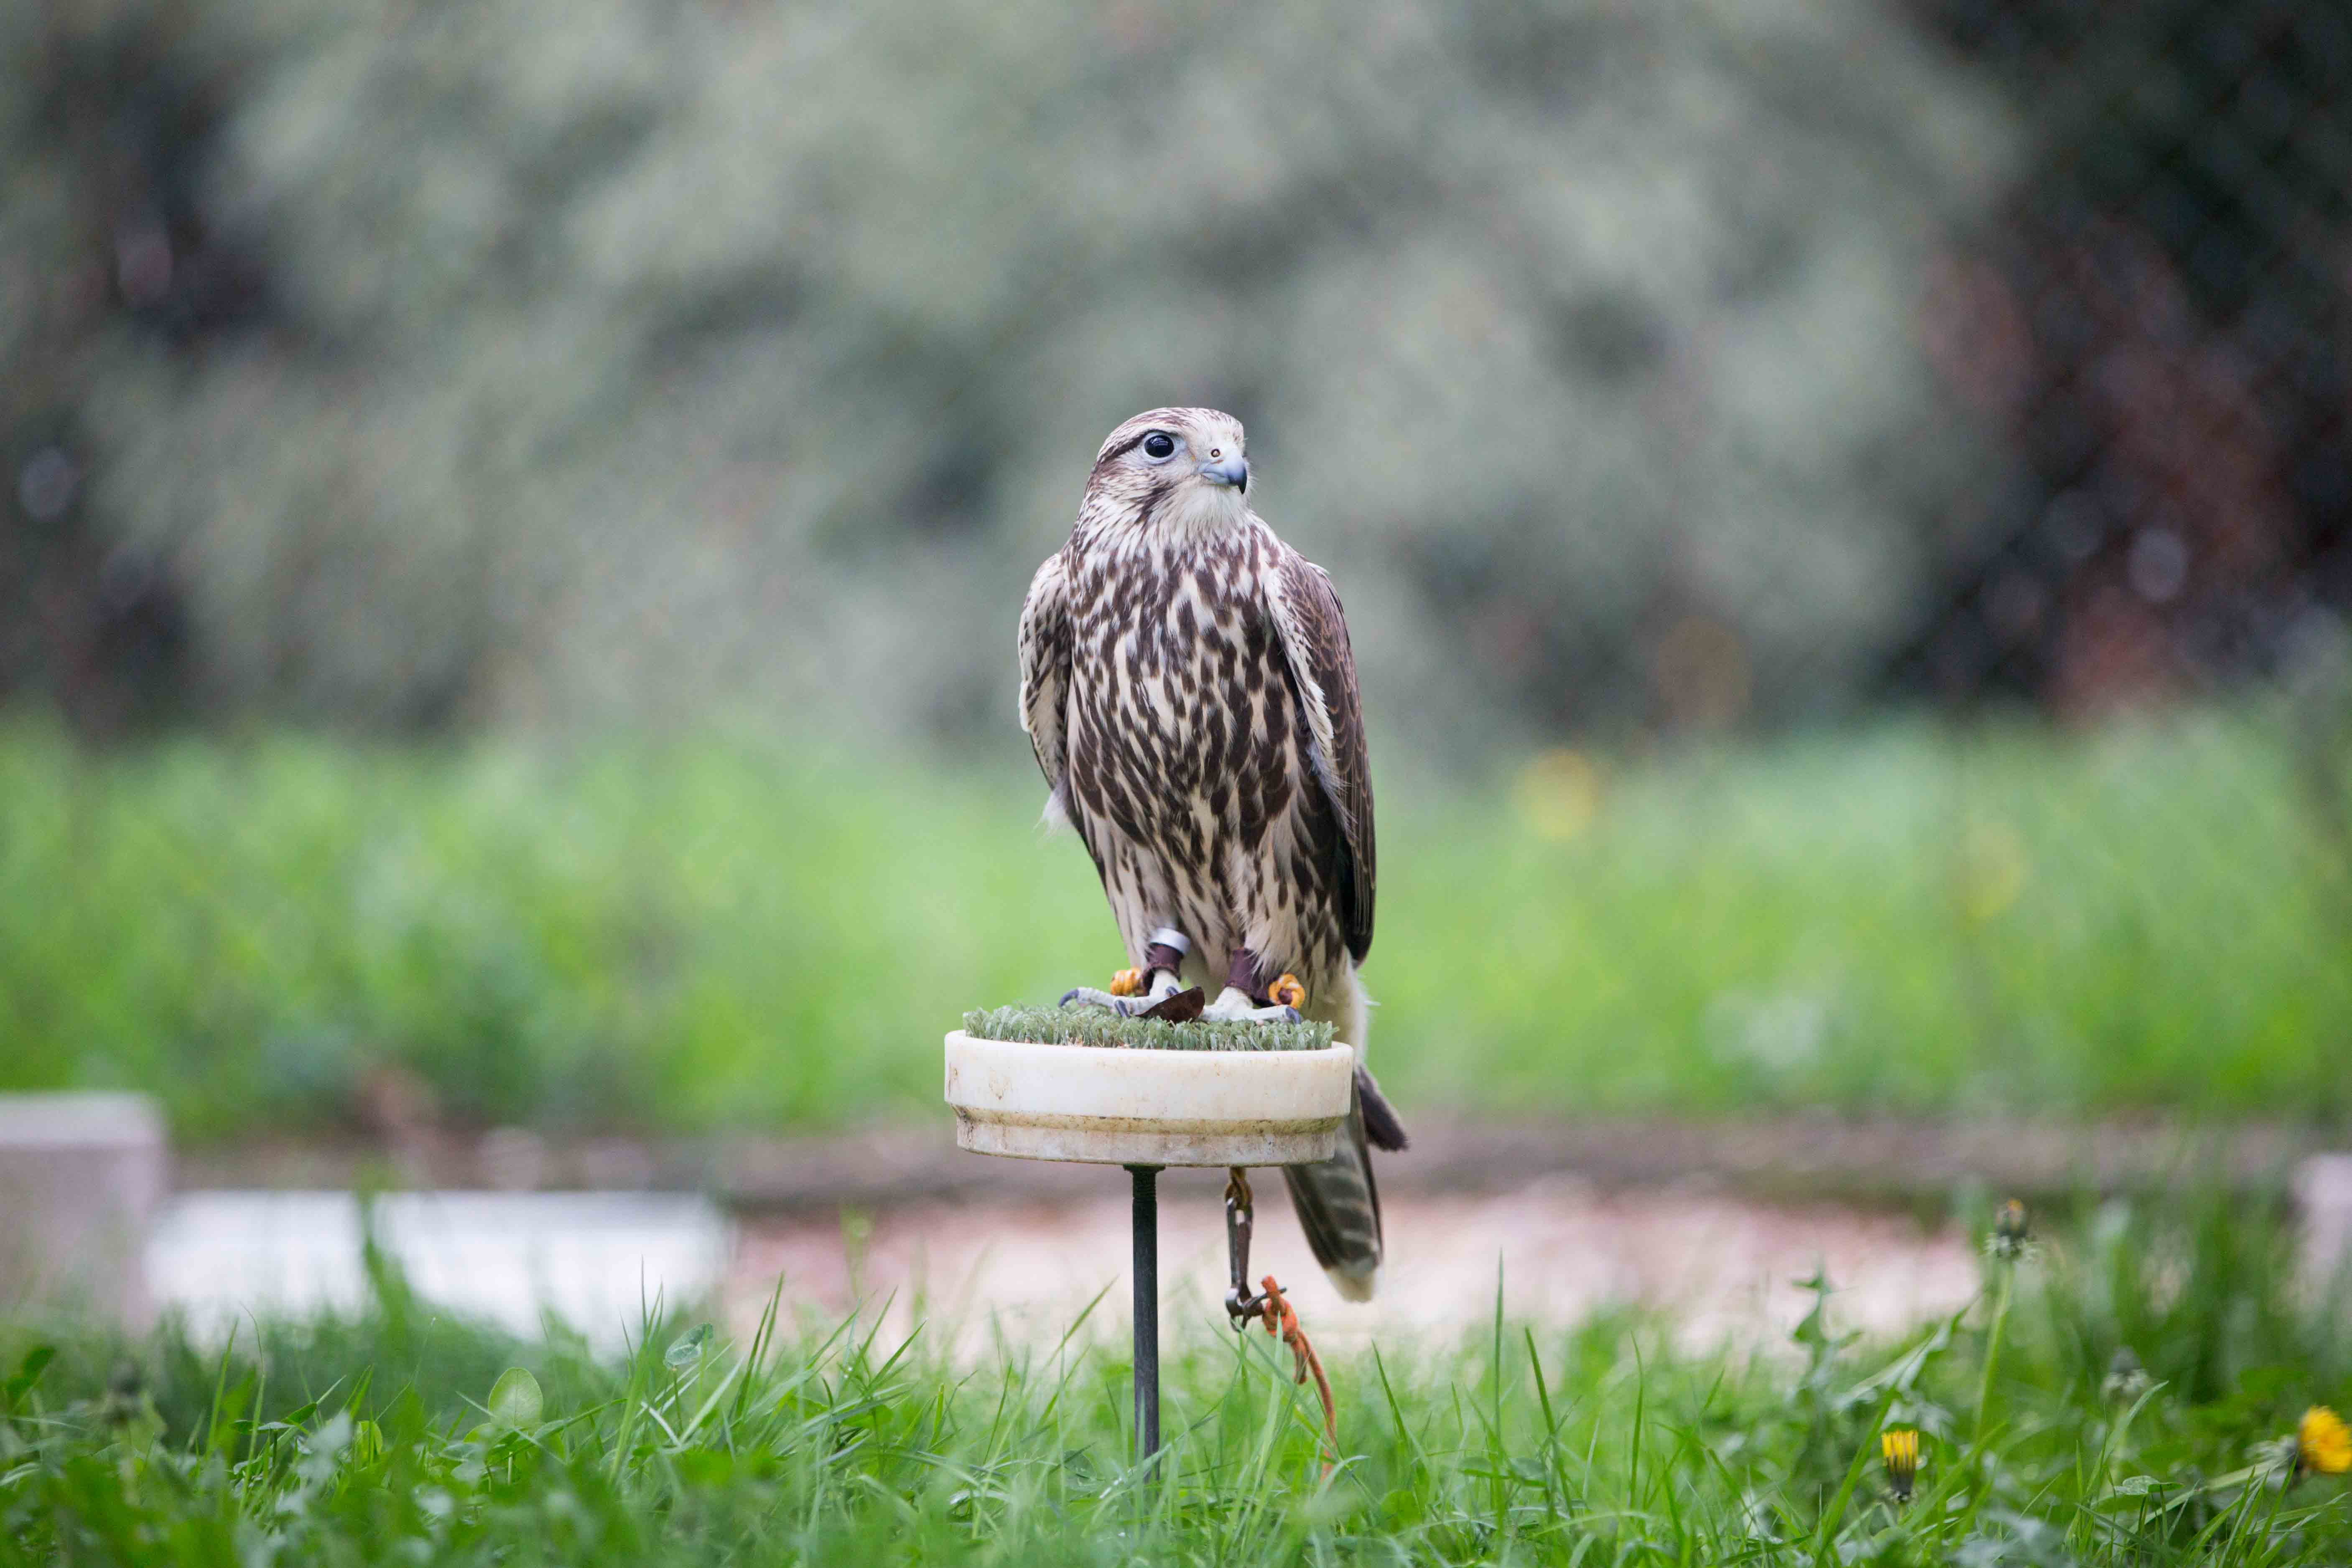 There are 50 falcons of different species in the centre: Pilgrims, Geritafes, Sacres, Lanarios and hybrids.